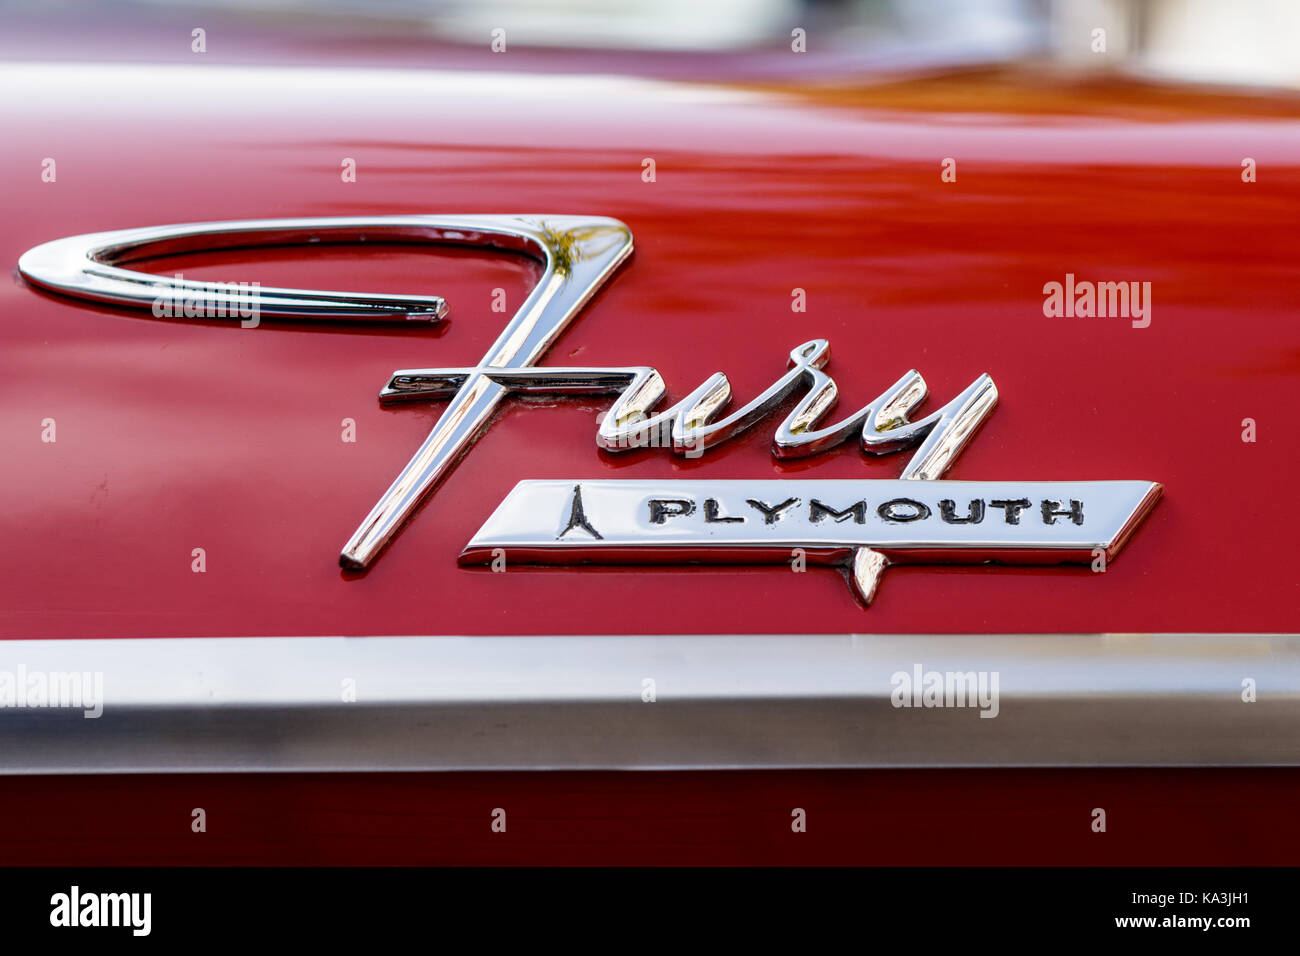 Laupheim, Germany - September 24, 2017: Plymouth Fury oldtimer car at the US Car Meeting event on September 24, 2017 in Laupheim, Germany. Stock Photo